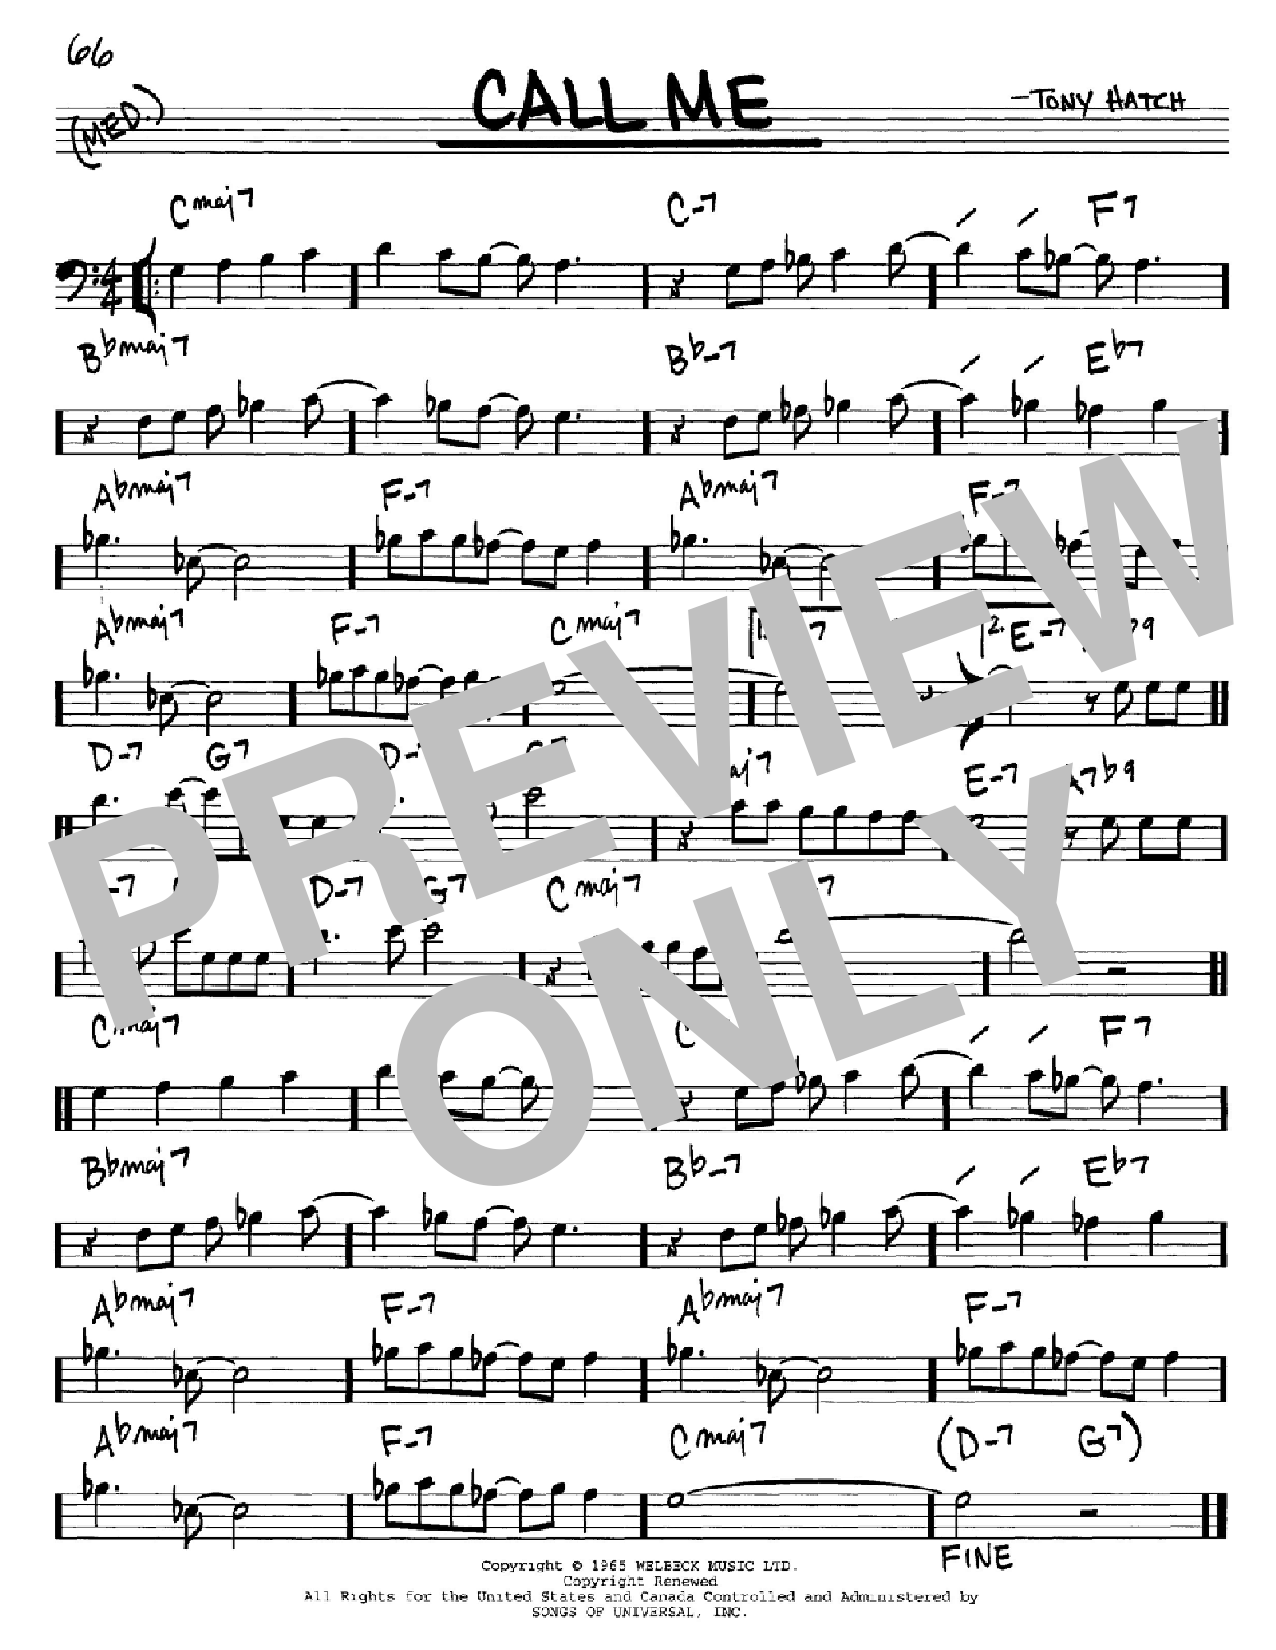 Download Tony Hatch Call Me Sheet Music